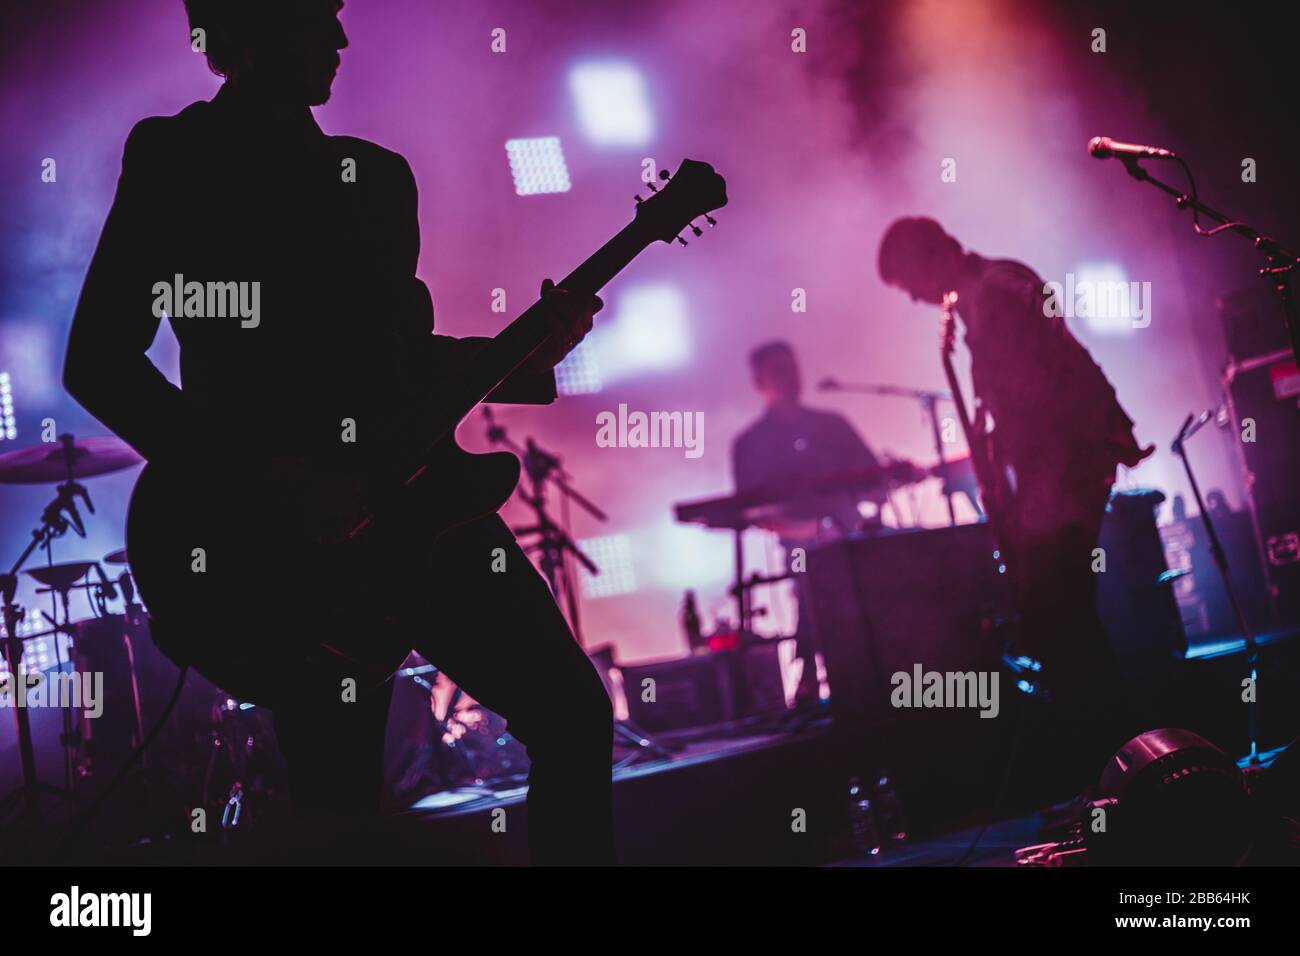 Blurred background light on rock concert with silhouette of musicians Stock Photo